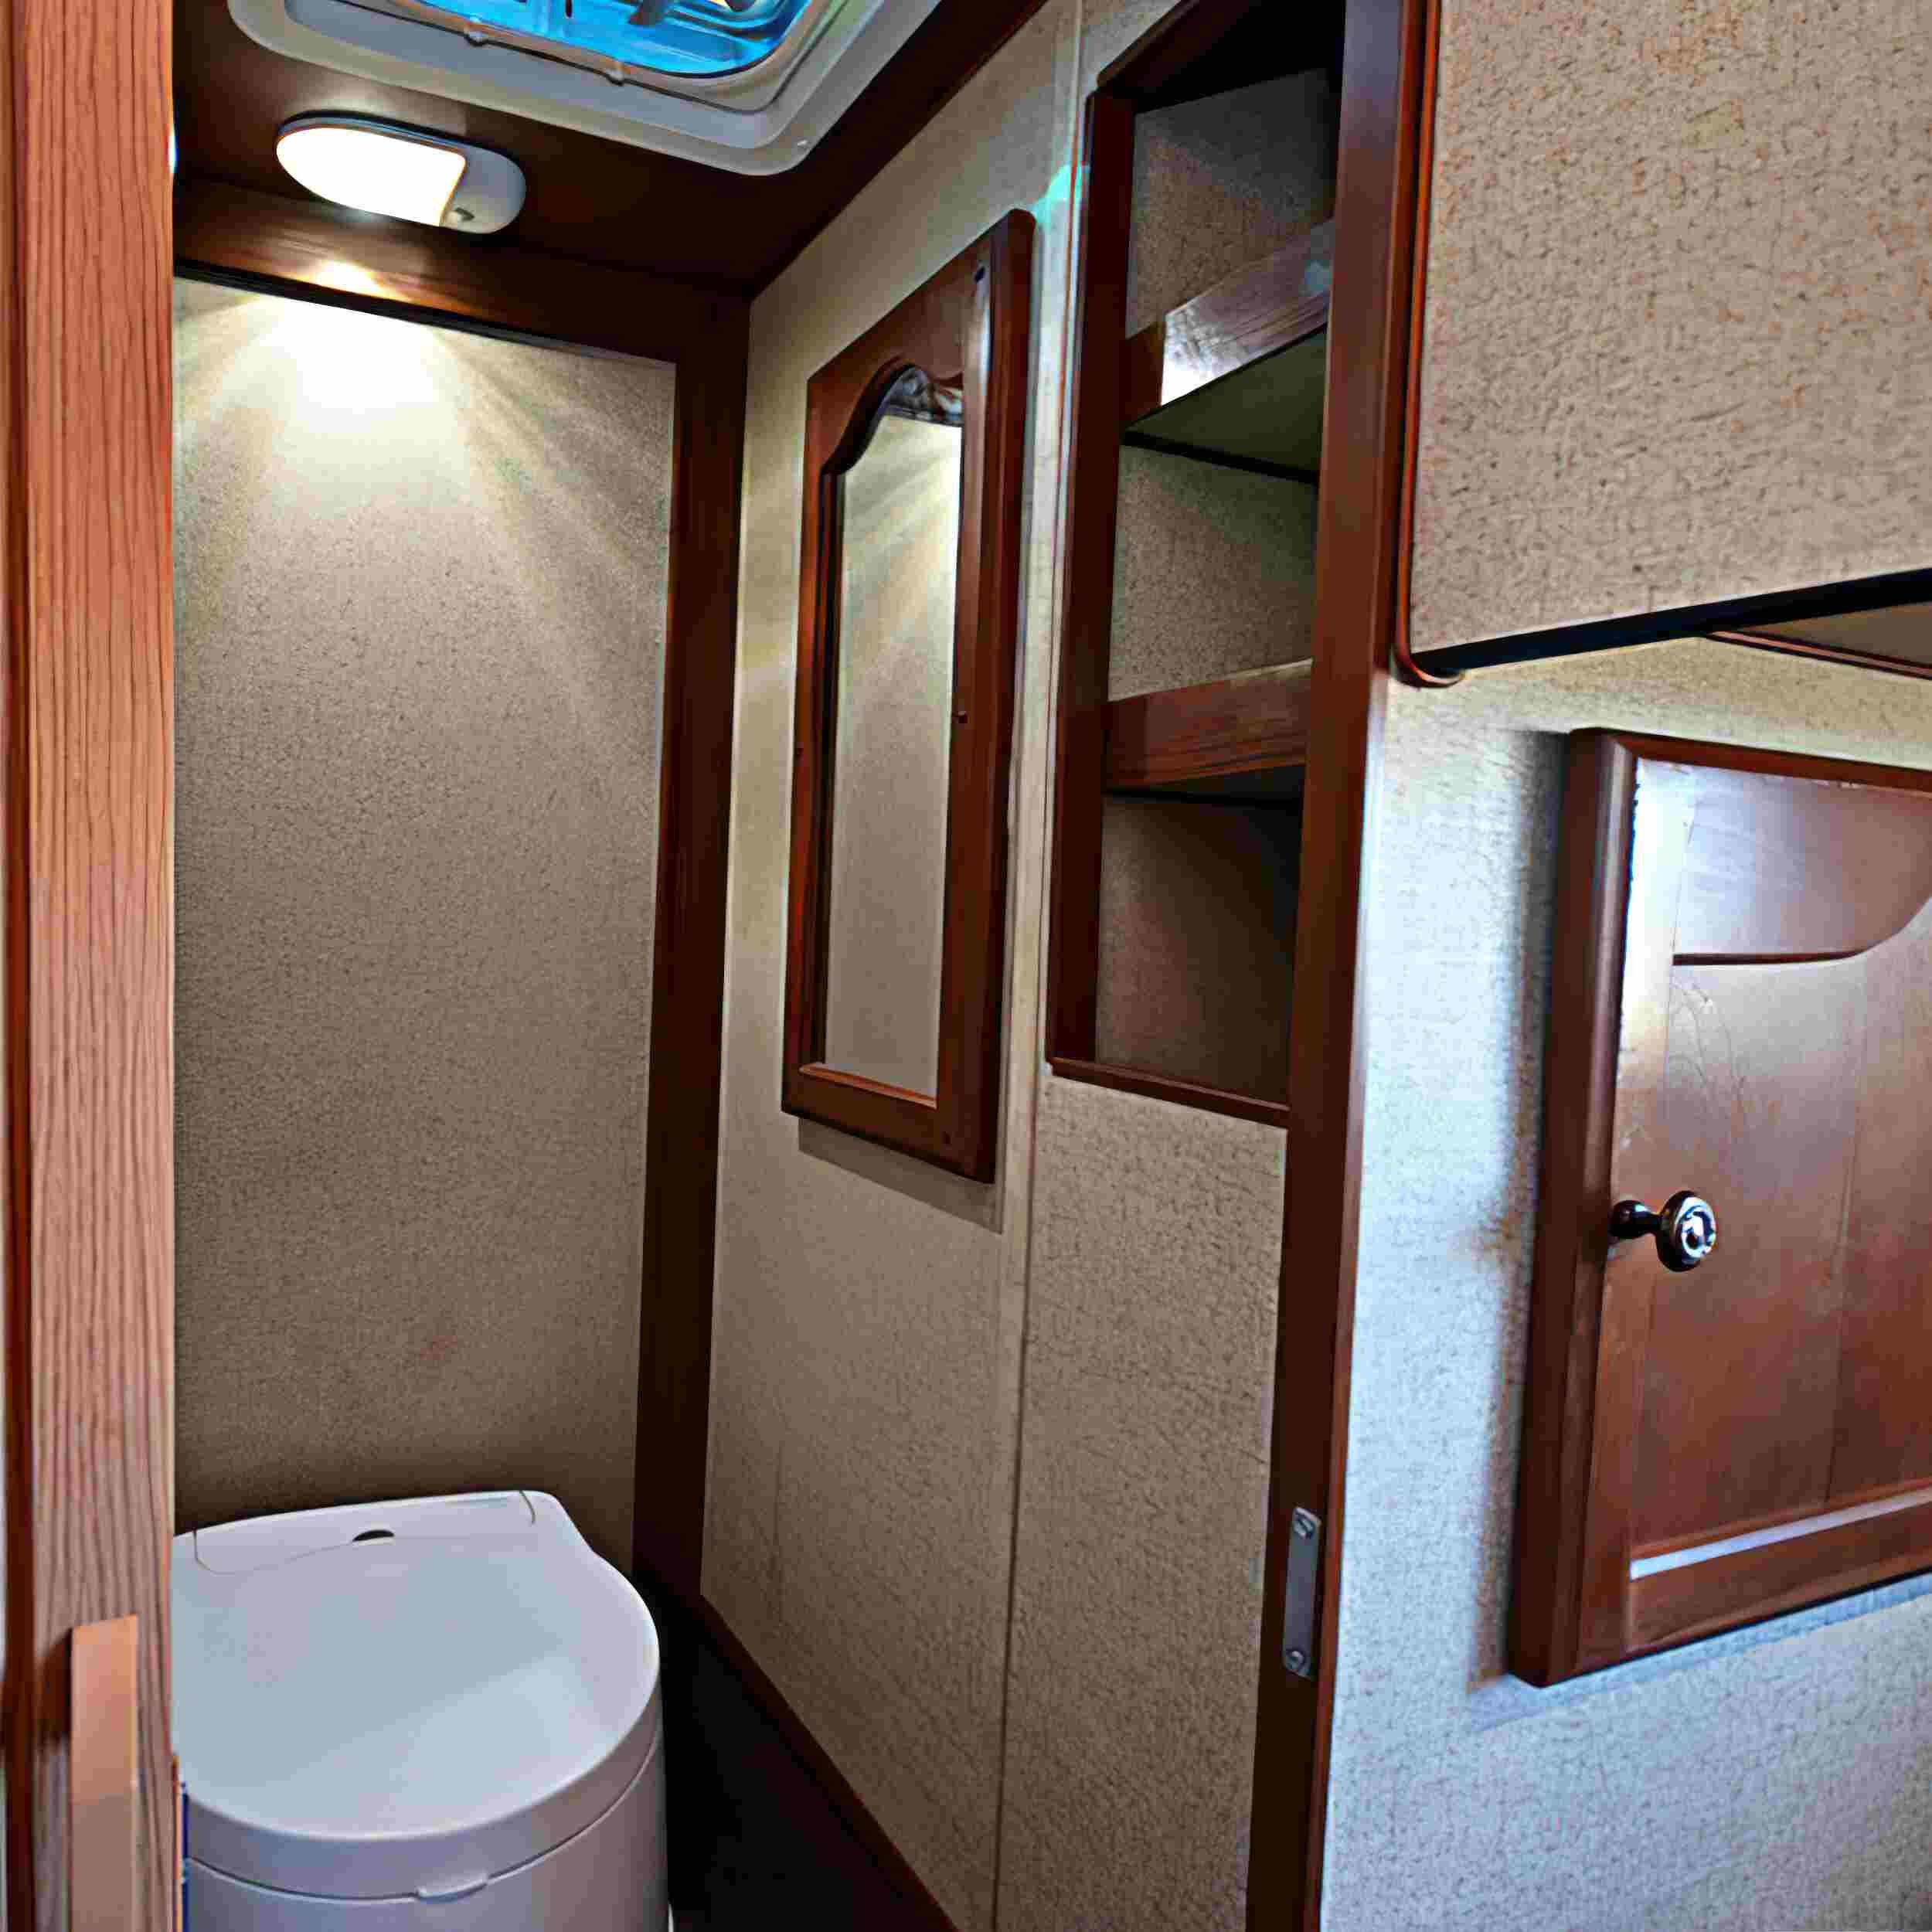  Beautiful woodgrain veneers give the Backpacker 2 rustic appeal, and there is a private interior area with a door and removable toilet. 